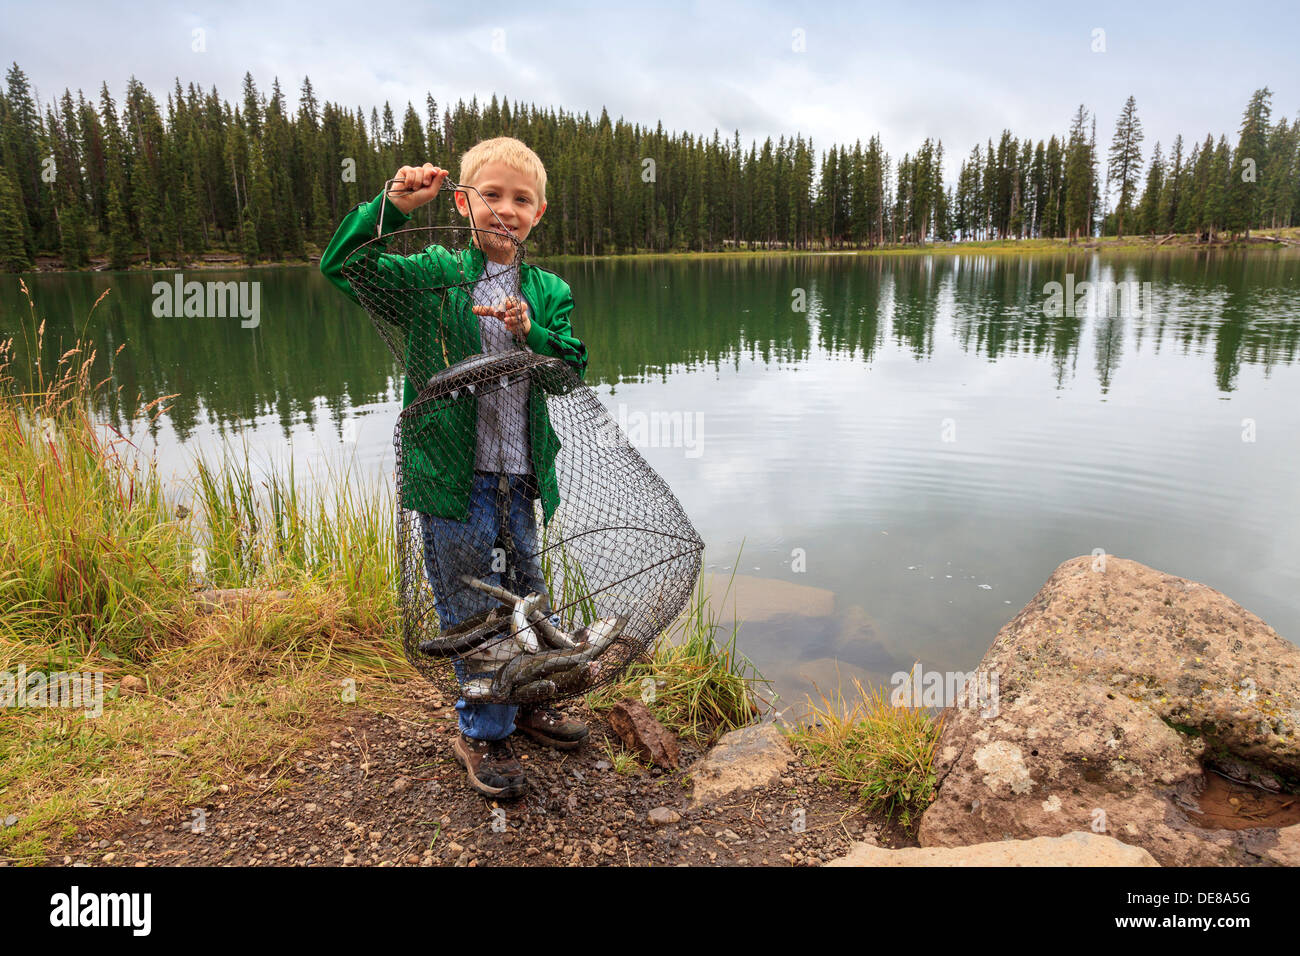 Young boy showing off the trout that he has caught in Eggleston Lake, Grand Mesa National Forest, Colorado, USA Stock Photo